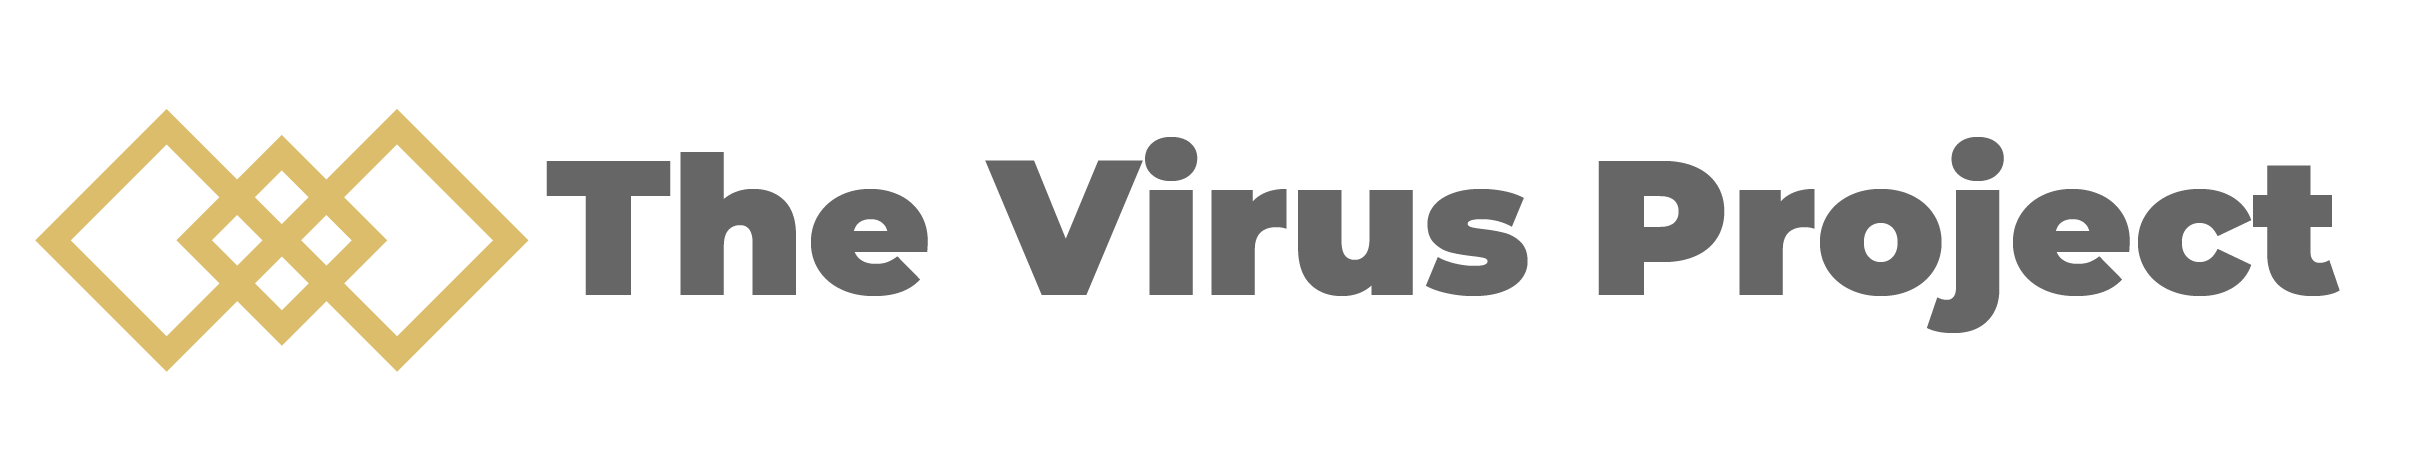 The Virus Project